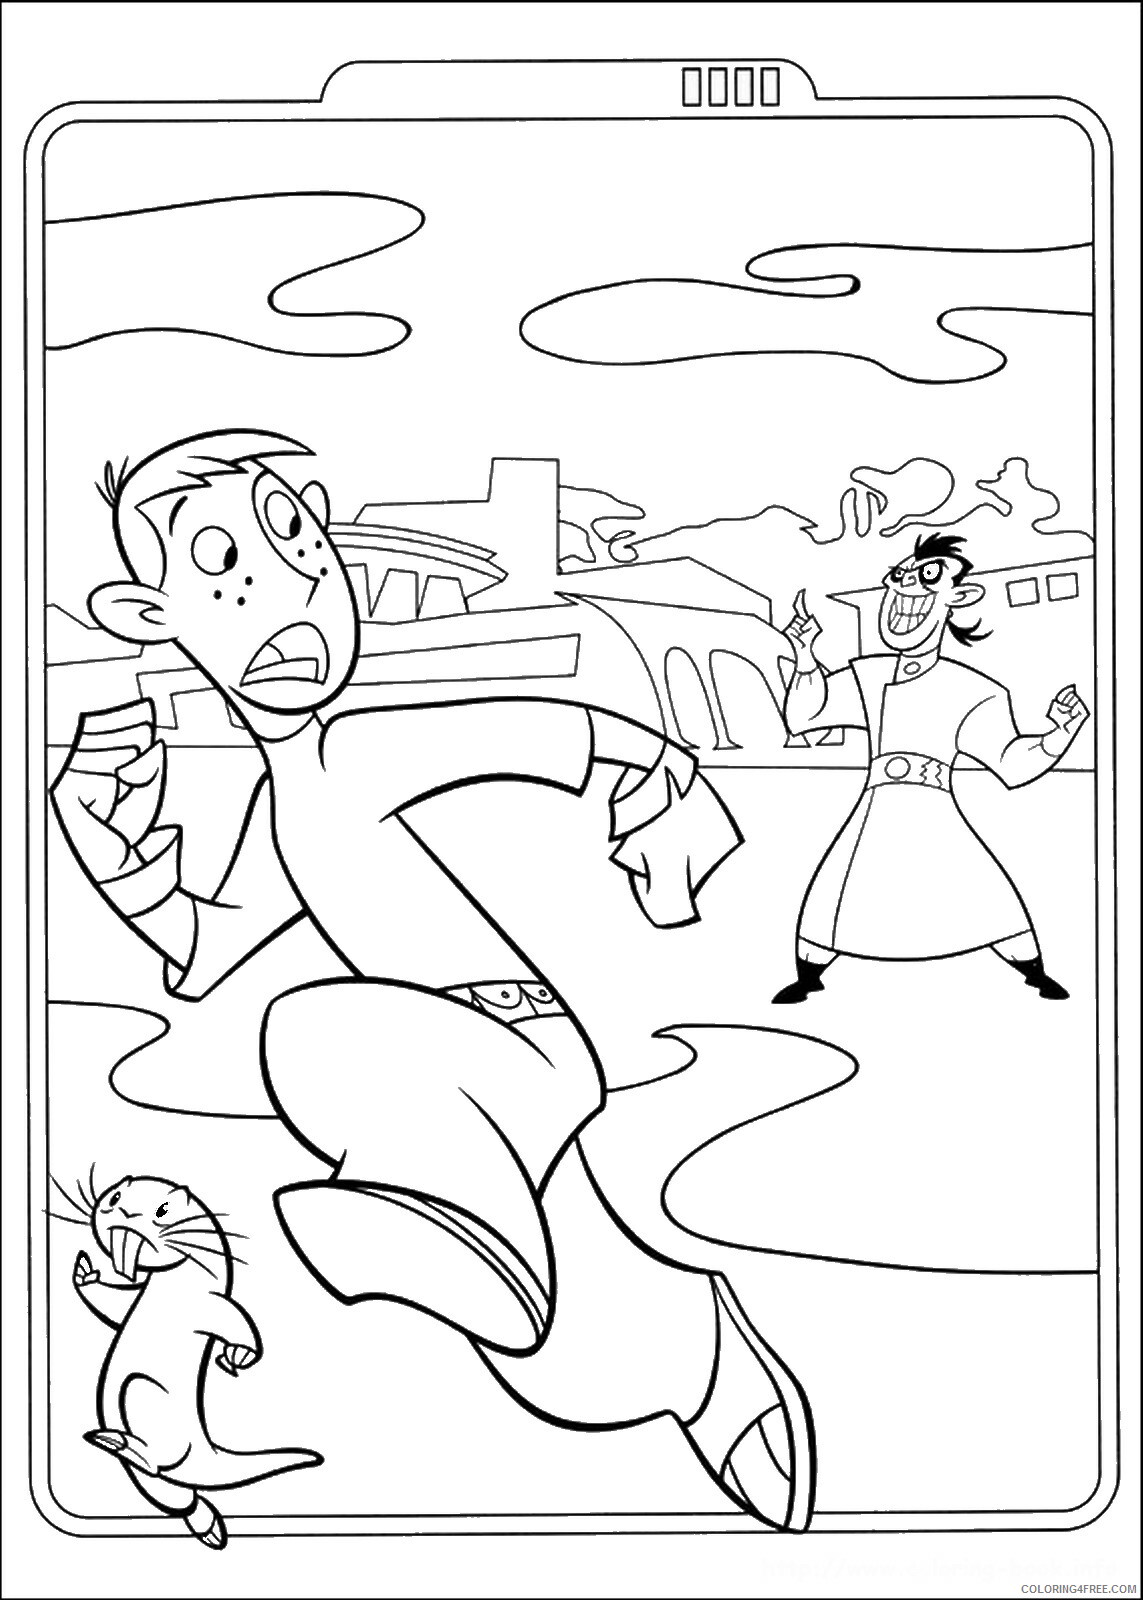 Kim Possible Coloring Pages TV Film kim possible_cl_02 Printable 2020 04237 Coloring4free